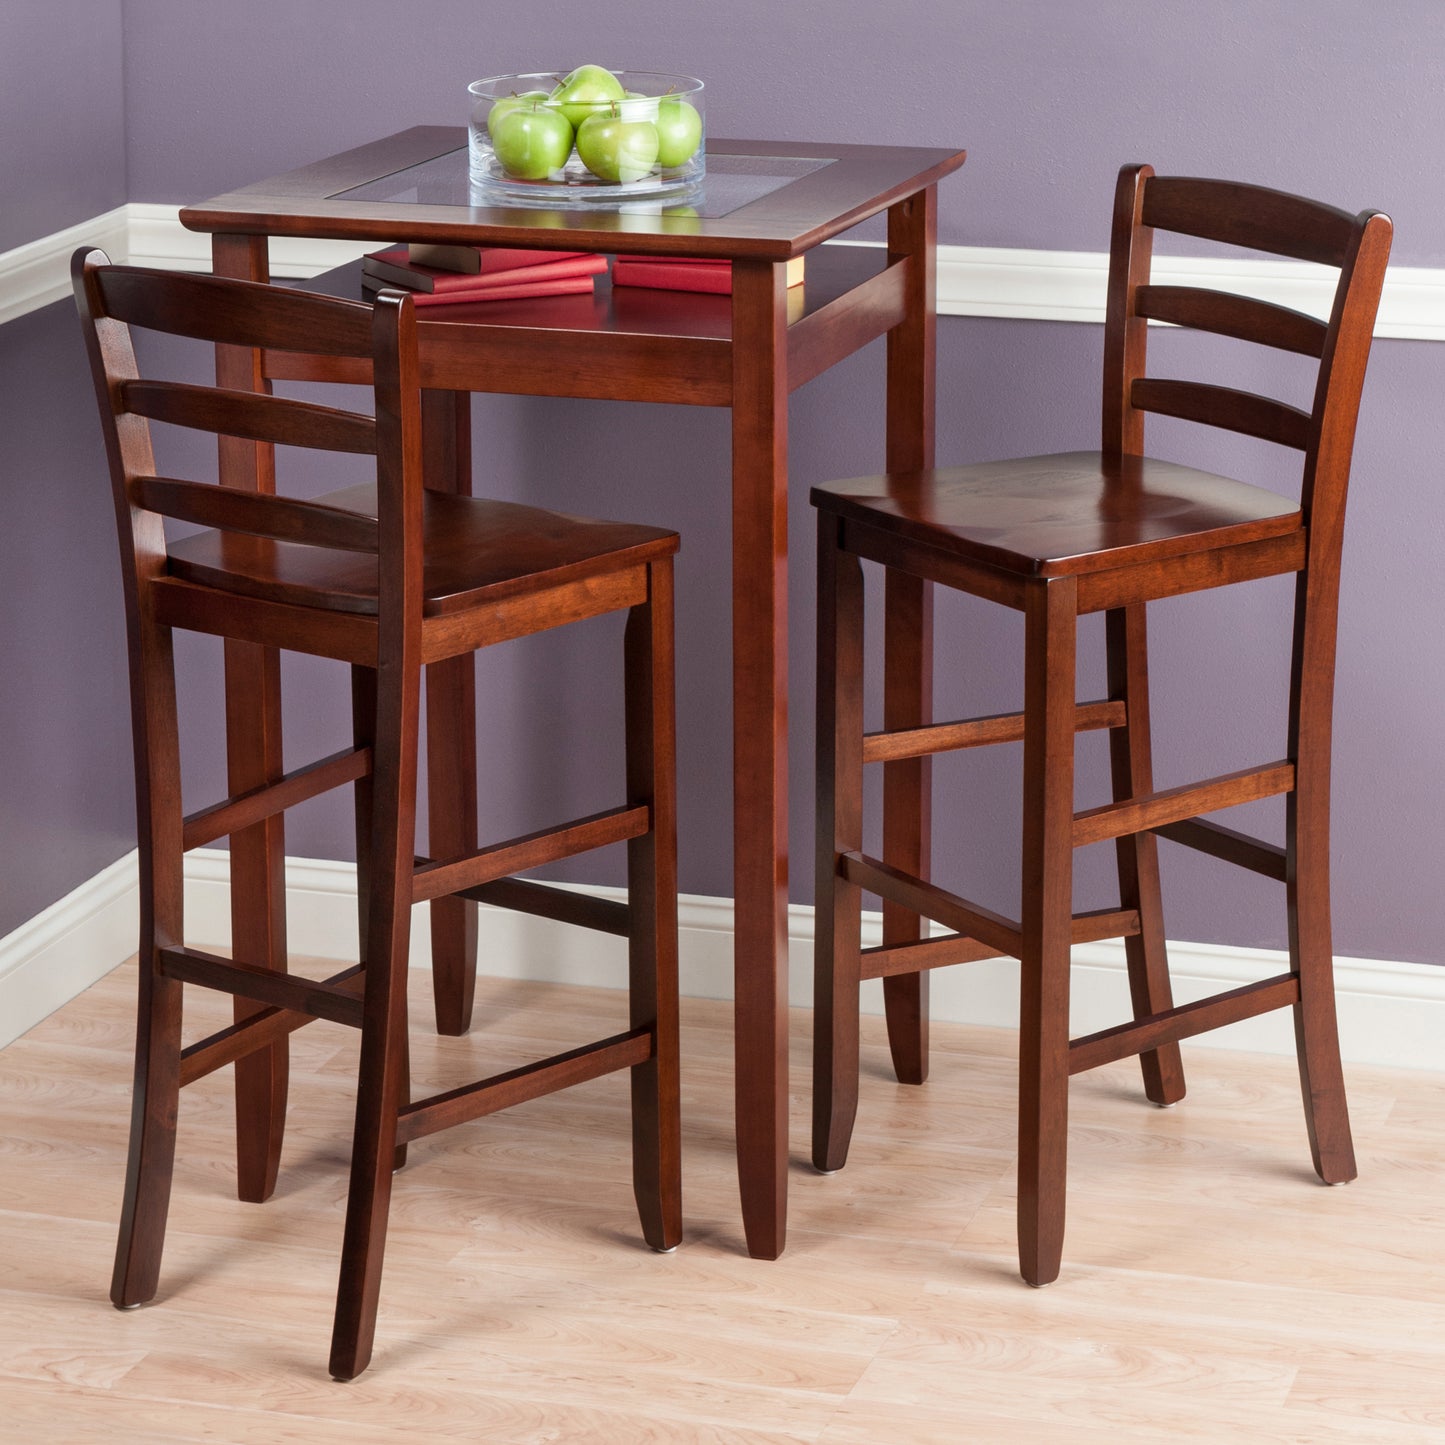 Halo 3-Pc High Table with Ladder-back Bar Stools, Walnut